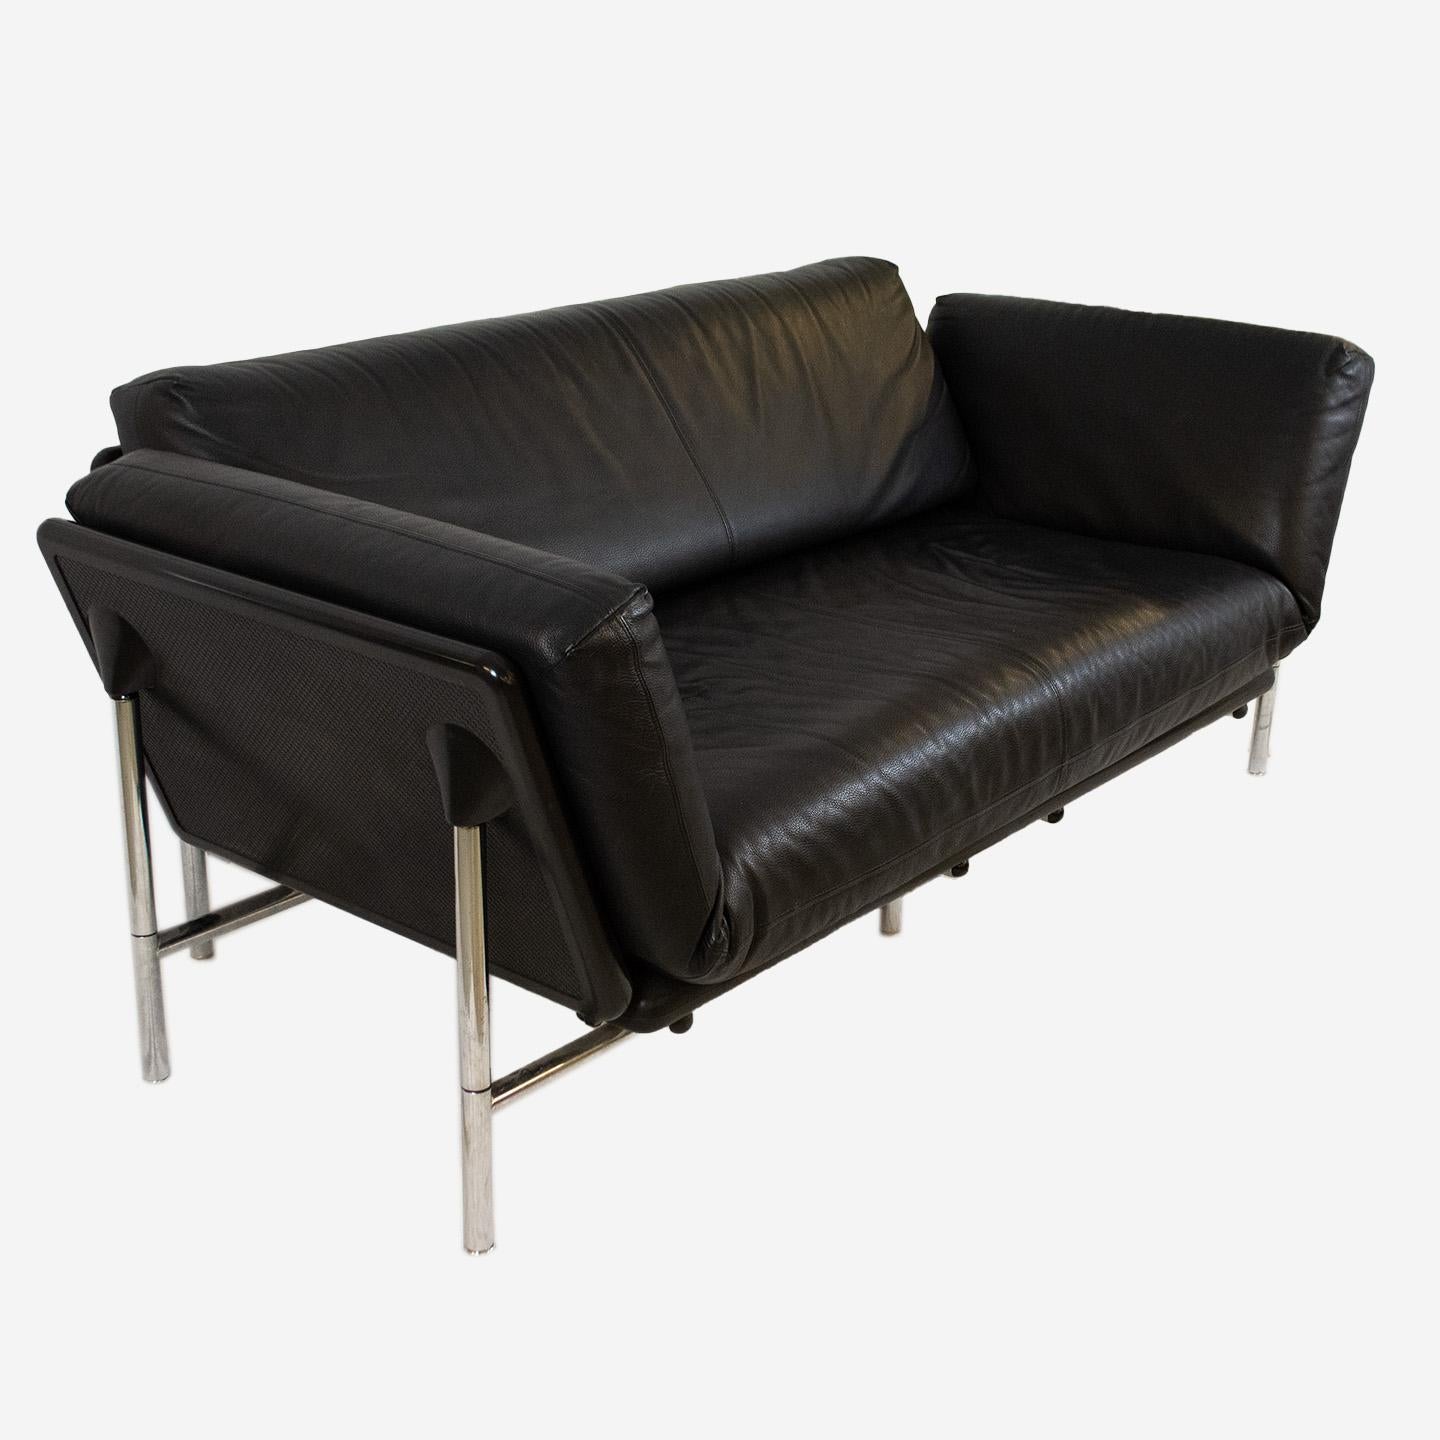 Rataplan Sofa by Dema, by Italian designer Roberto Tapinassi, is a perfect example of furniture design which marries functionality and modern design. The cushions are upholstered in black leather and are completely removable. The two armrests can be